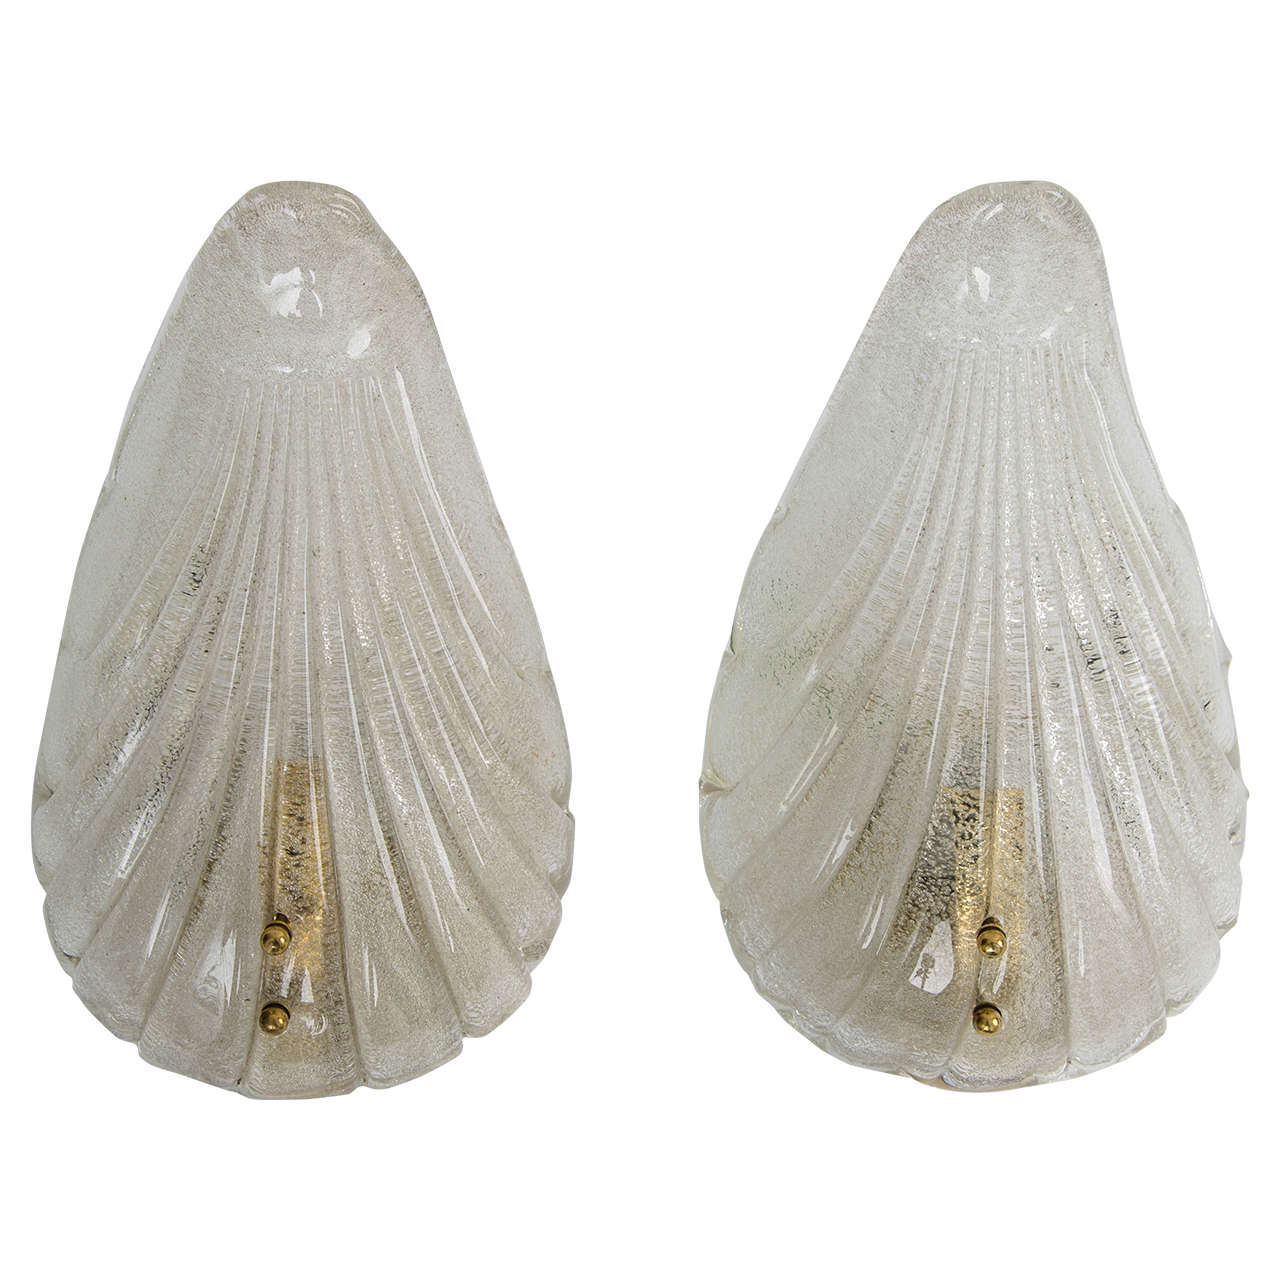 Mazzega Pair of Wall Lights For Sale